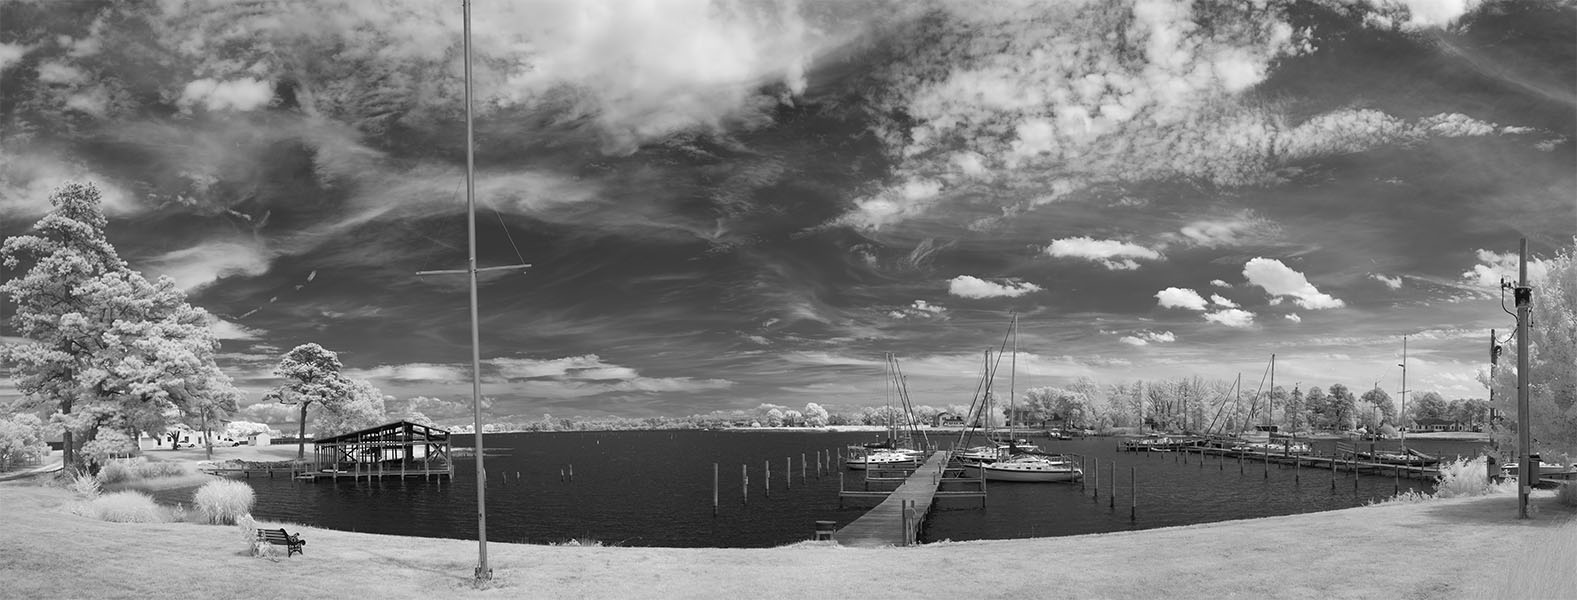 Infrared Image of Marina on the Potomac River.